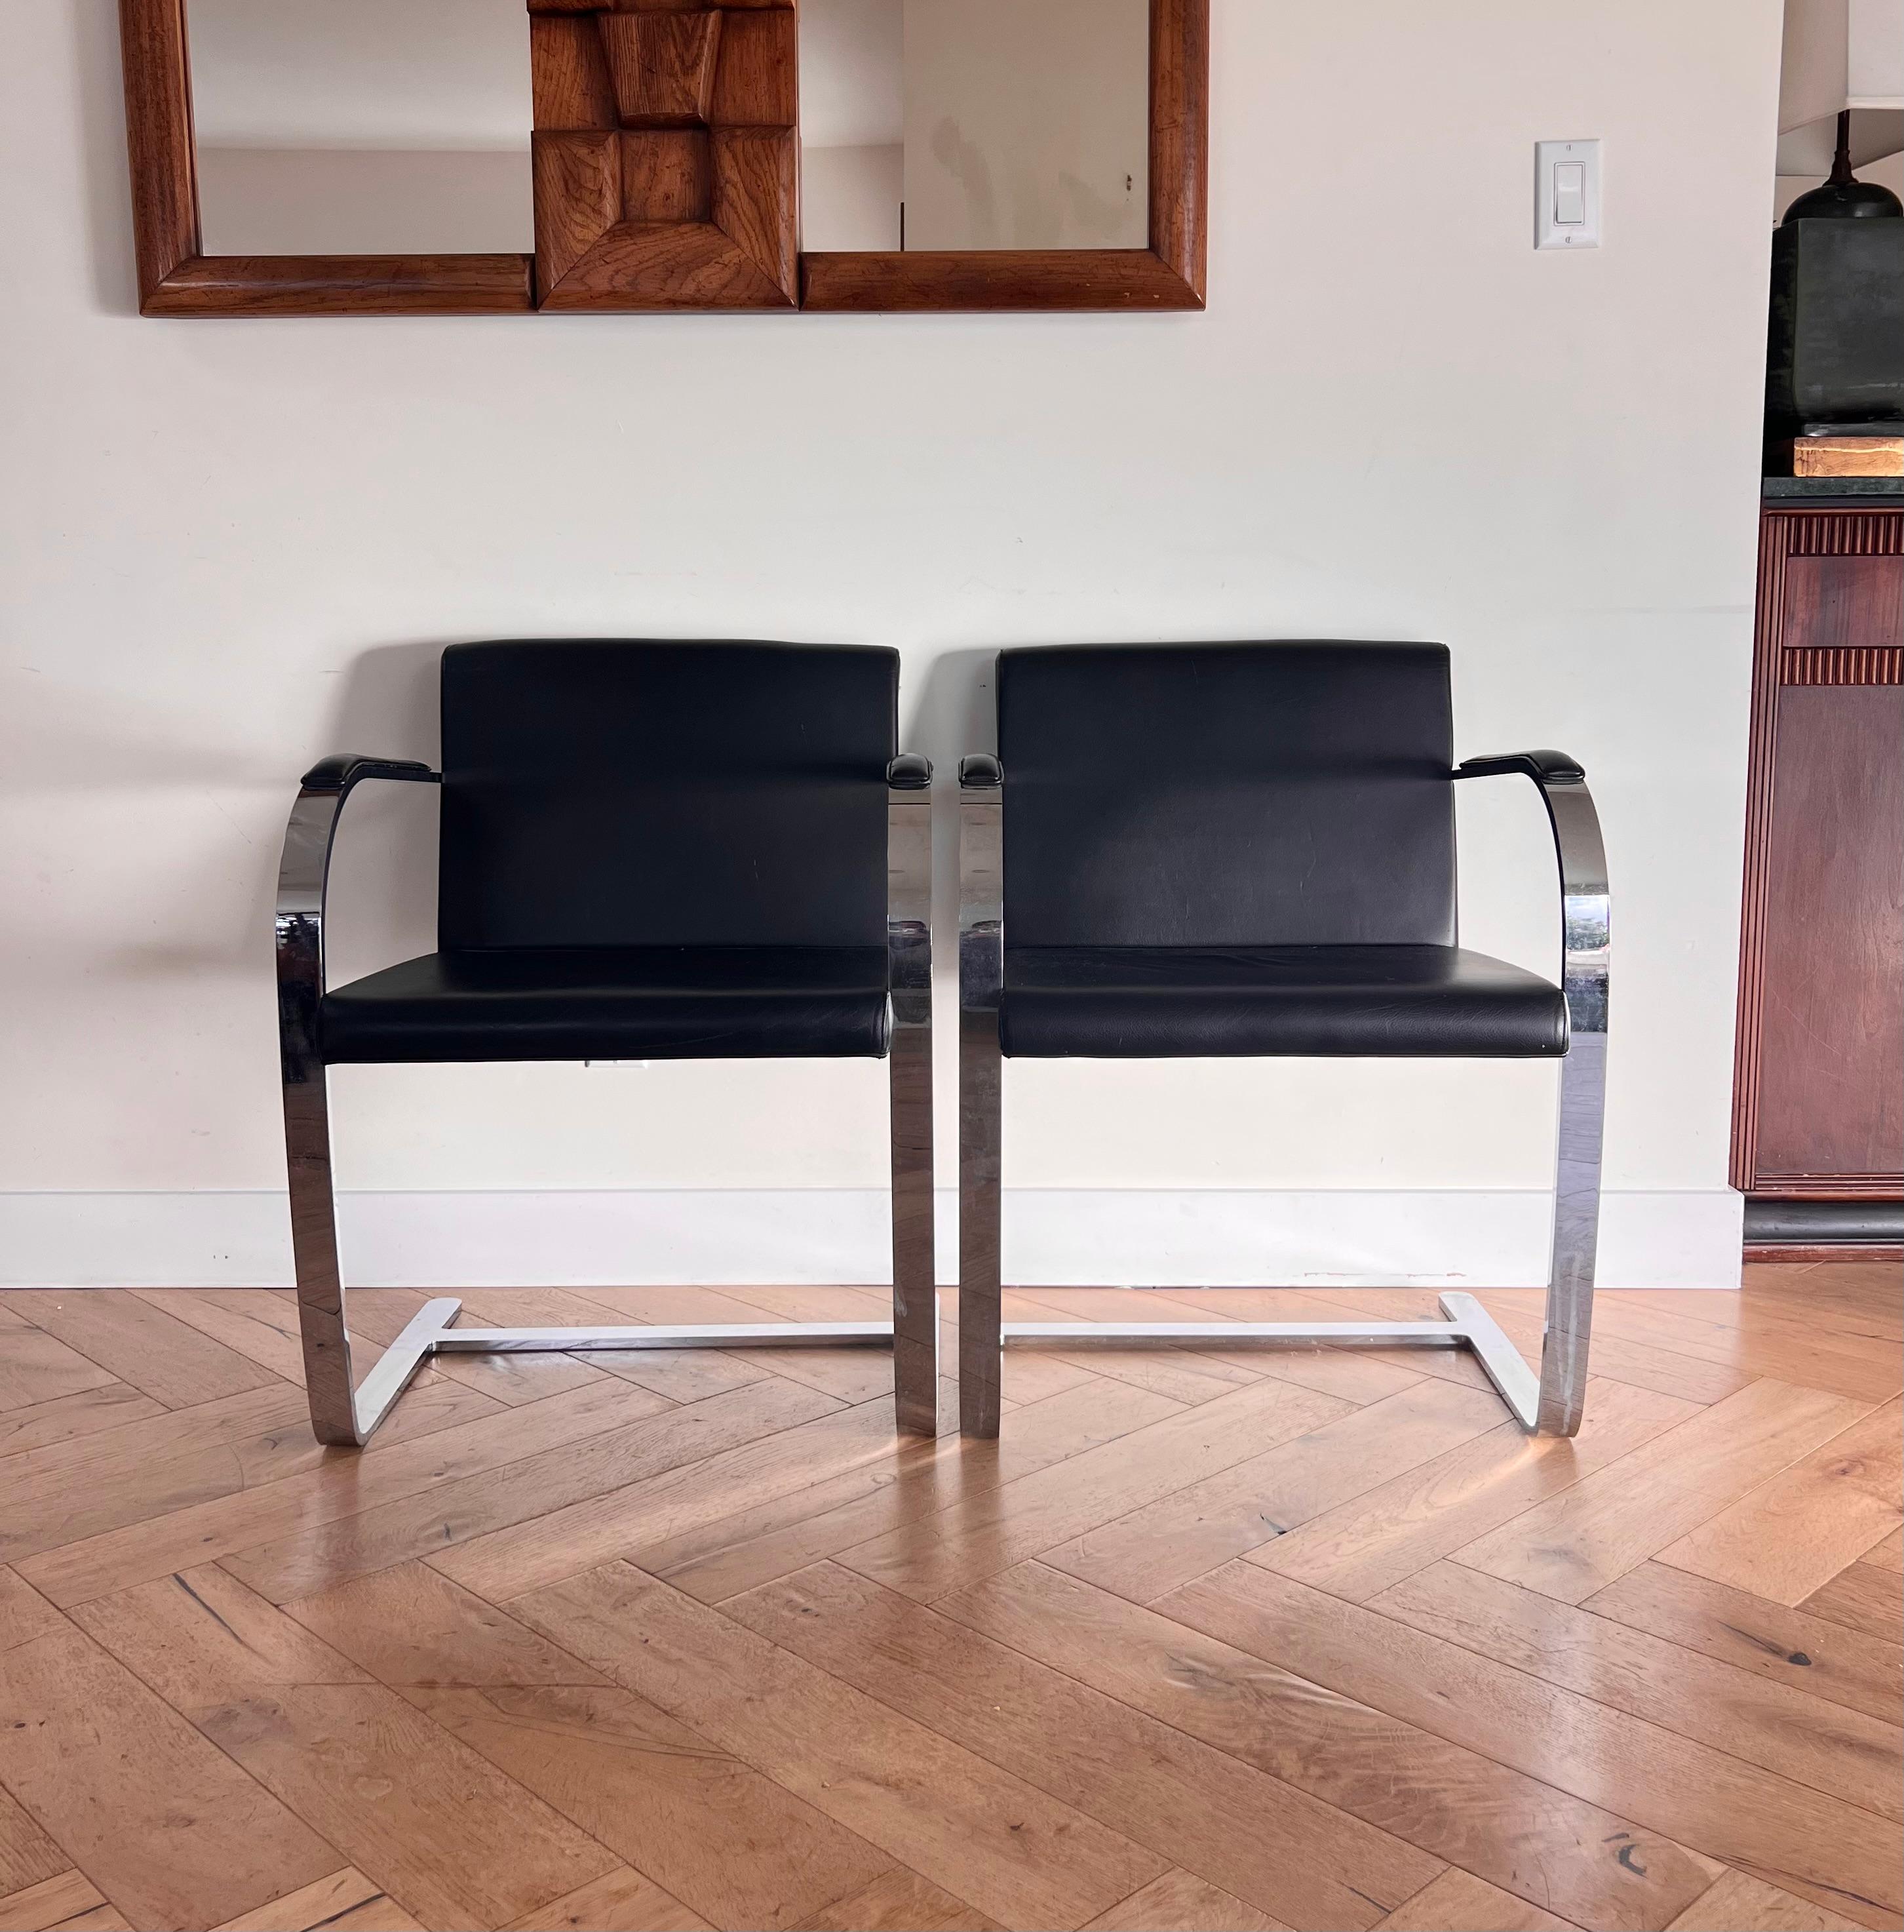 Pair of Mies van der Rohe Brno chairs by Palazzetti, 1970s For Sale 8